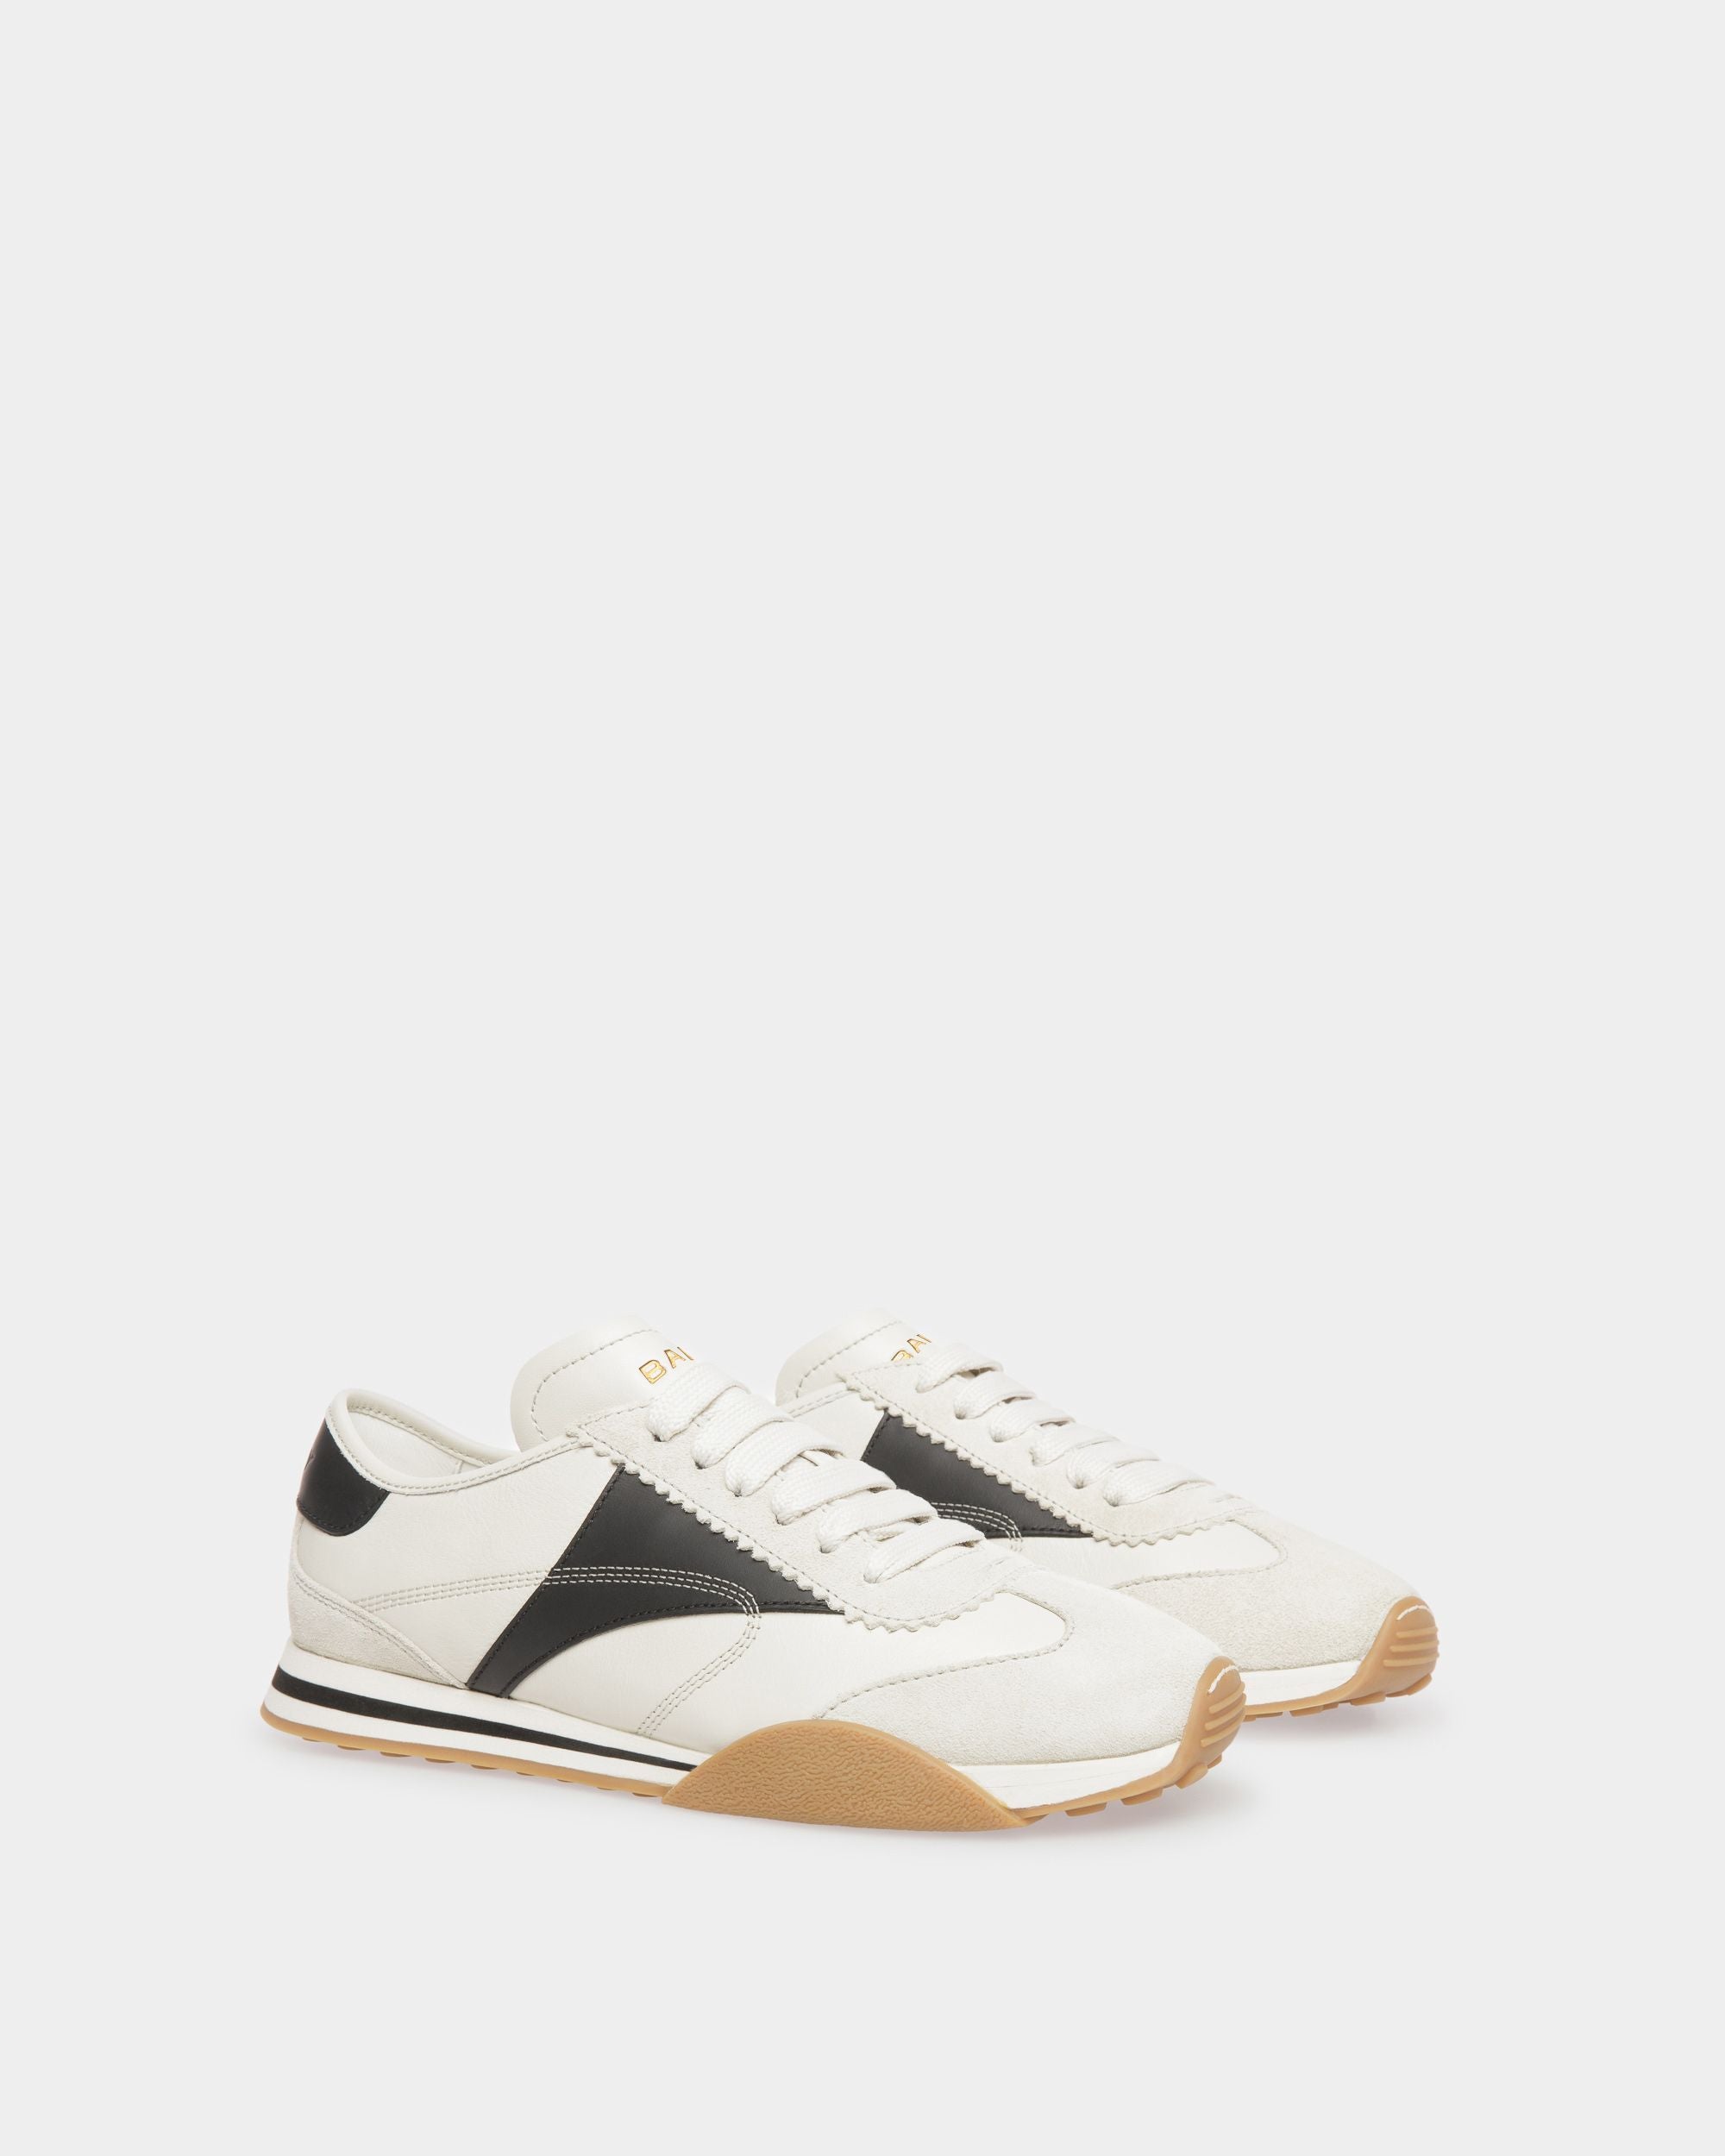 Sonney | Women's Sneakers | Dusty White And Black Leather | Bally | Still Life 3/4 Front